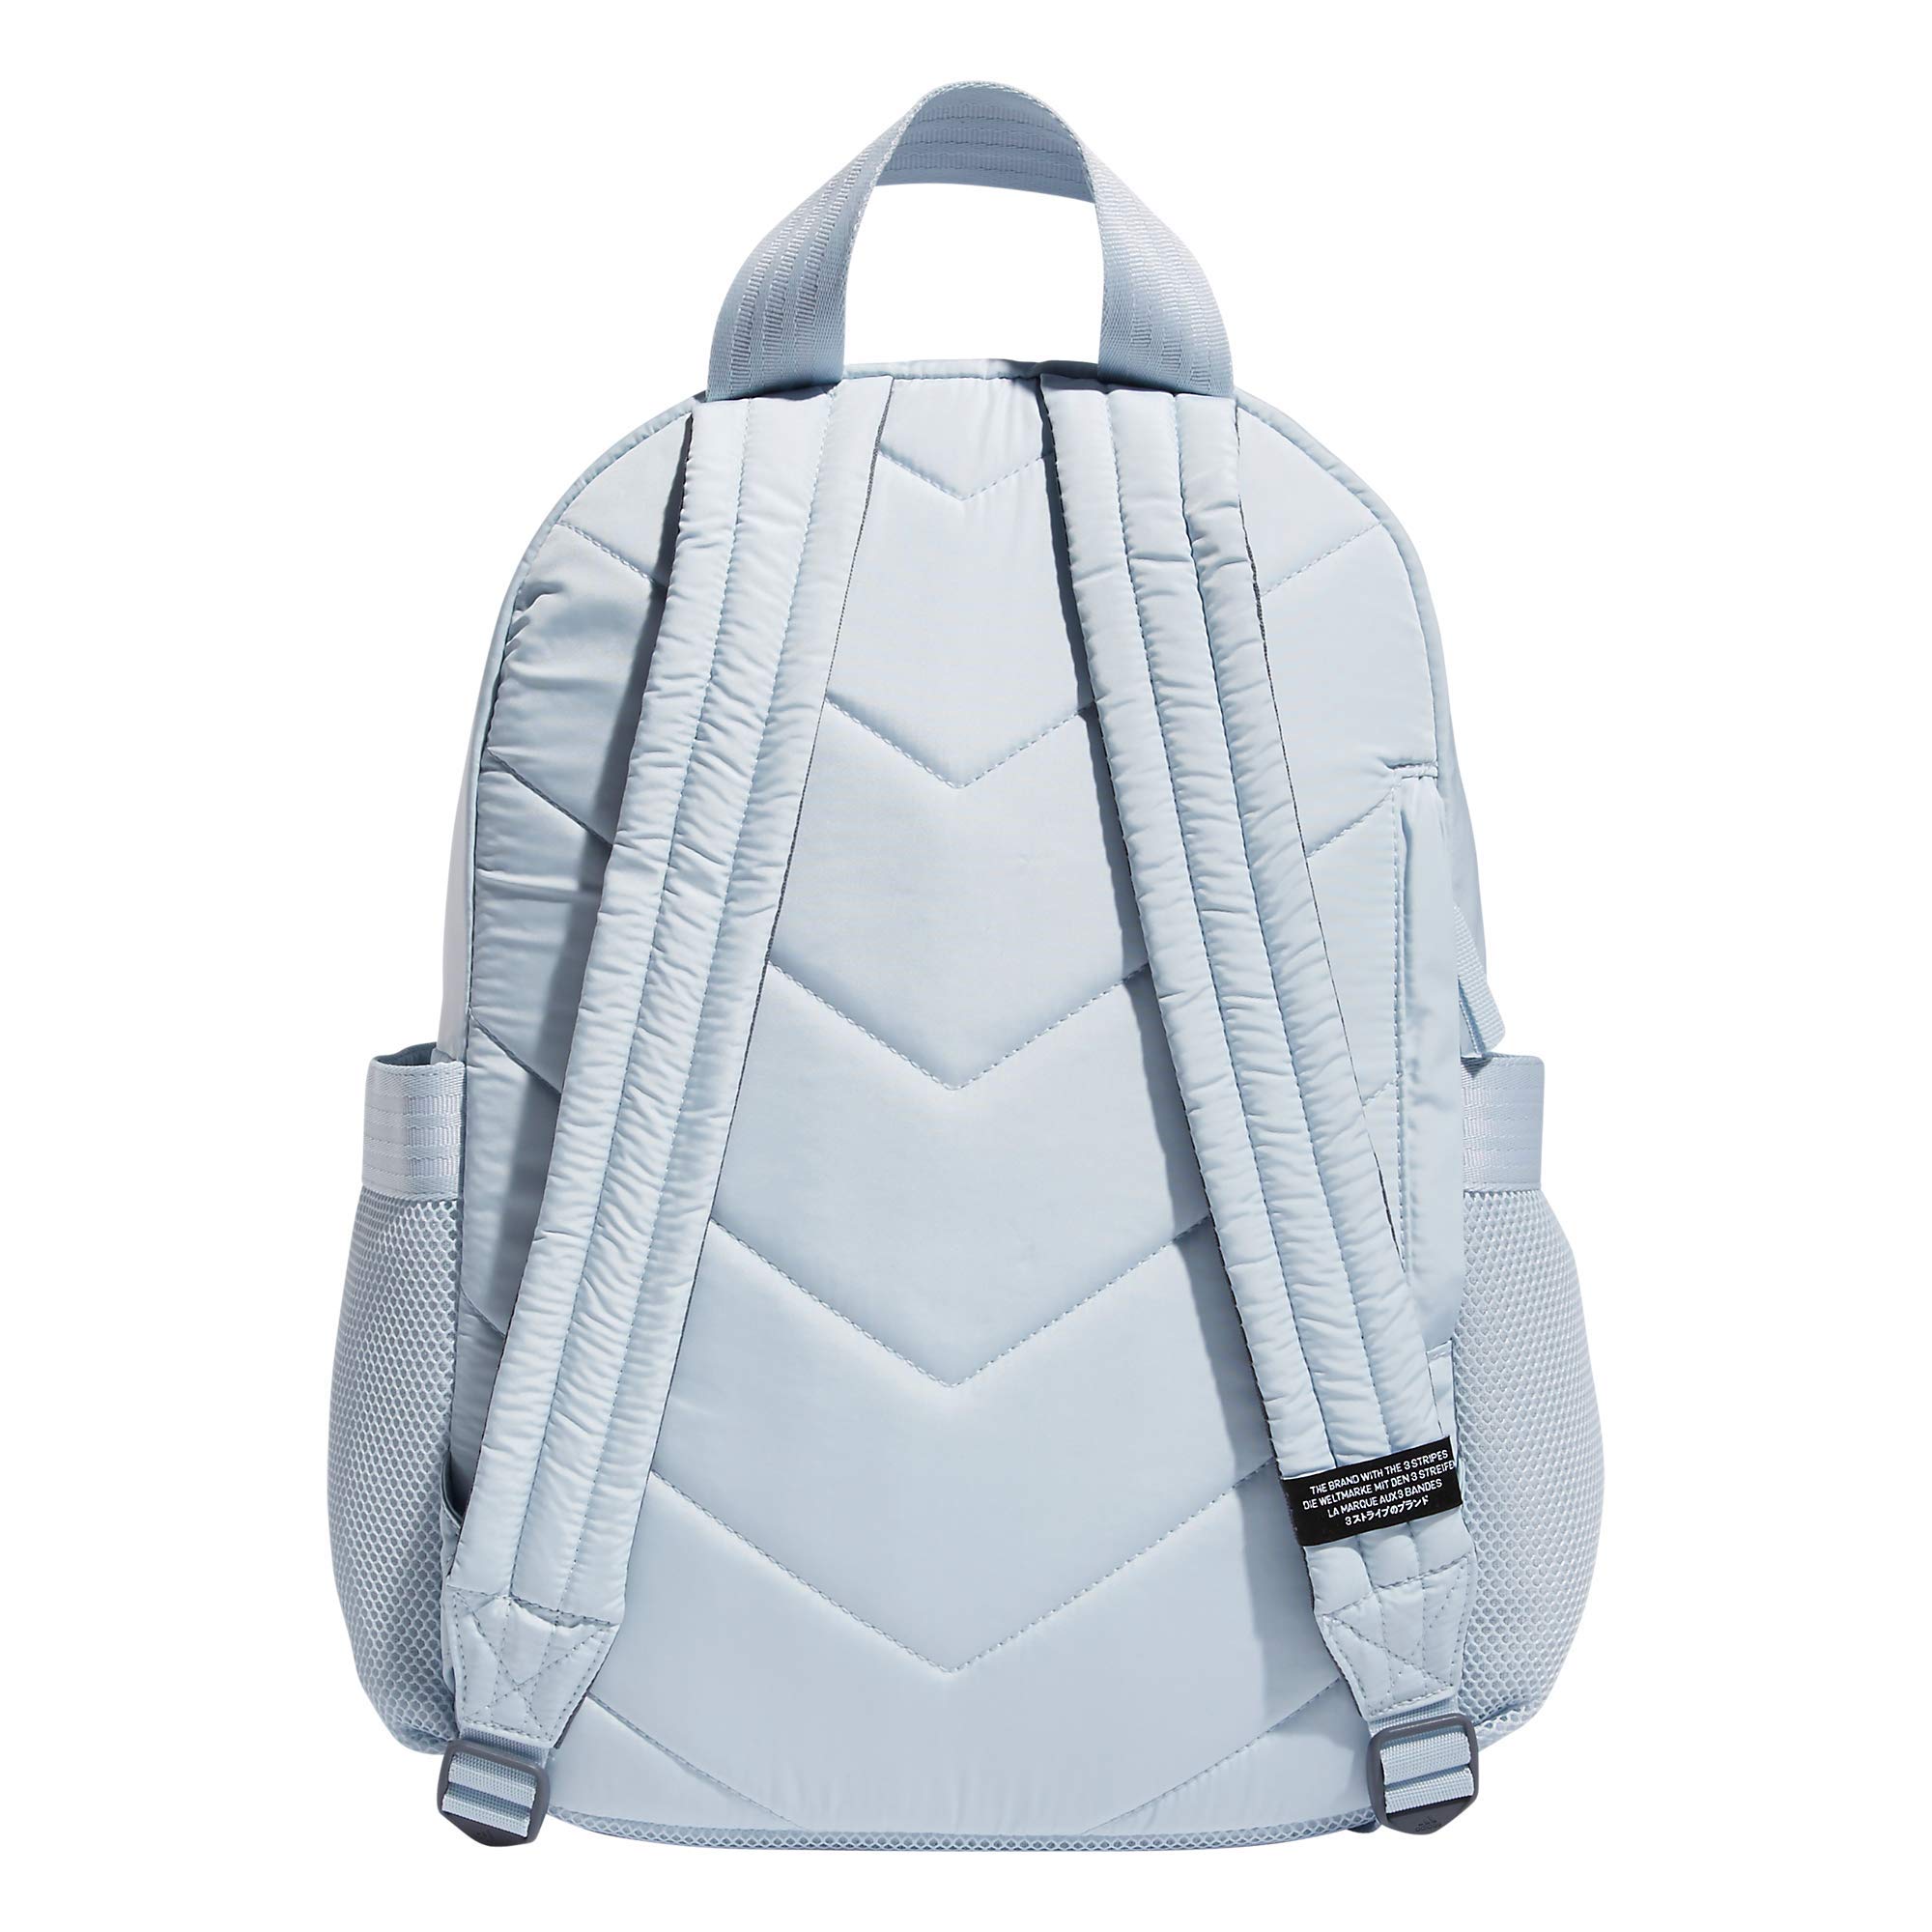 adidas Women's VFA 3 Sport Backpack, Halo Blue/White, One Size